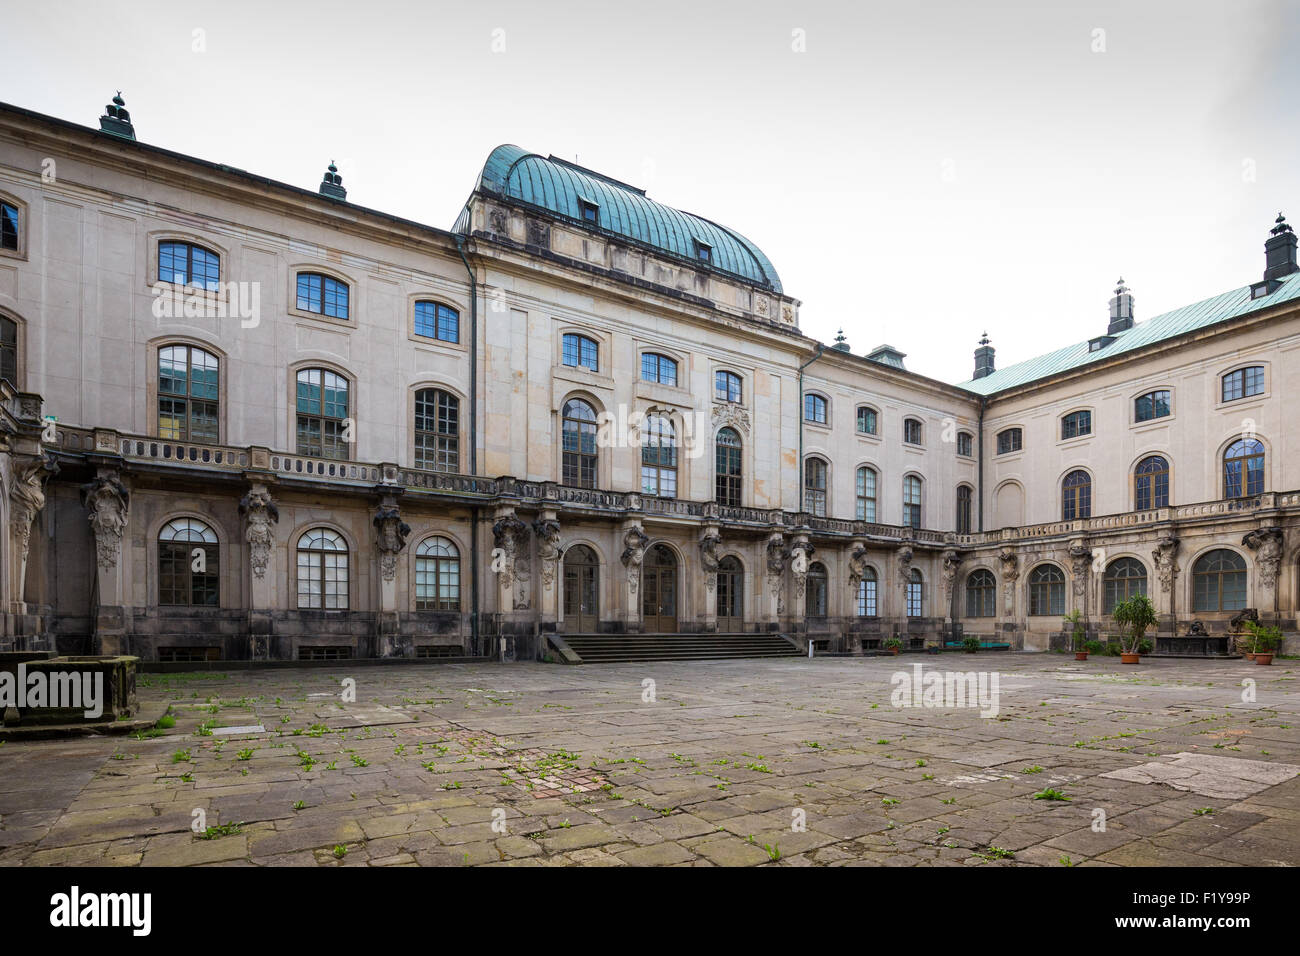 Japanese Palace baroque building on the Neustadtbank of river Elba in Dresden, Germany, Europe Stock Photo